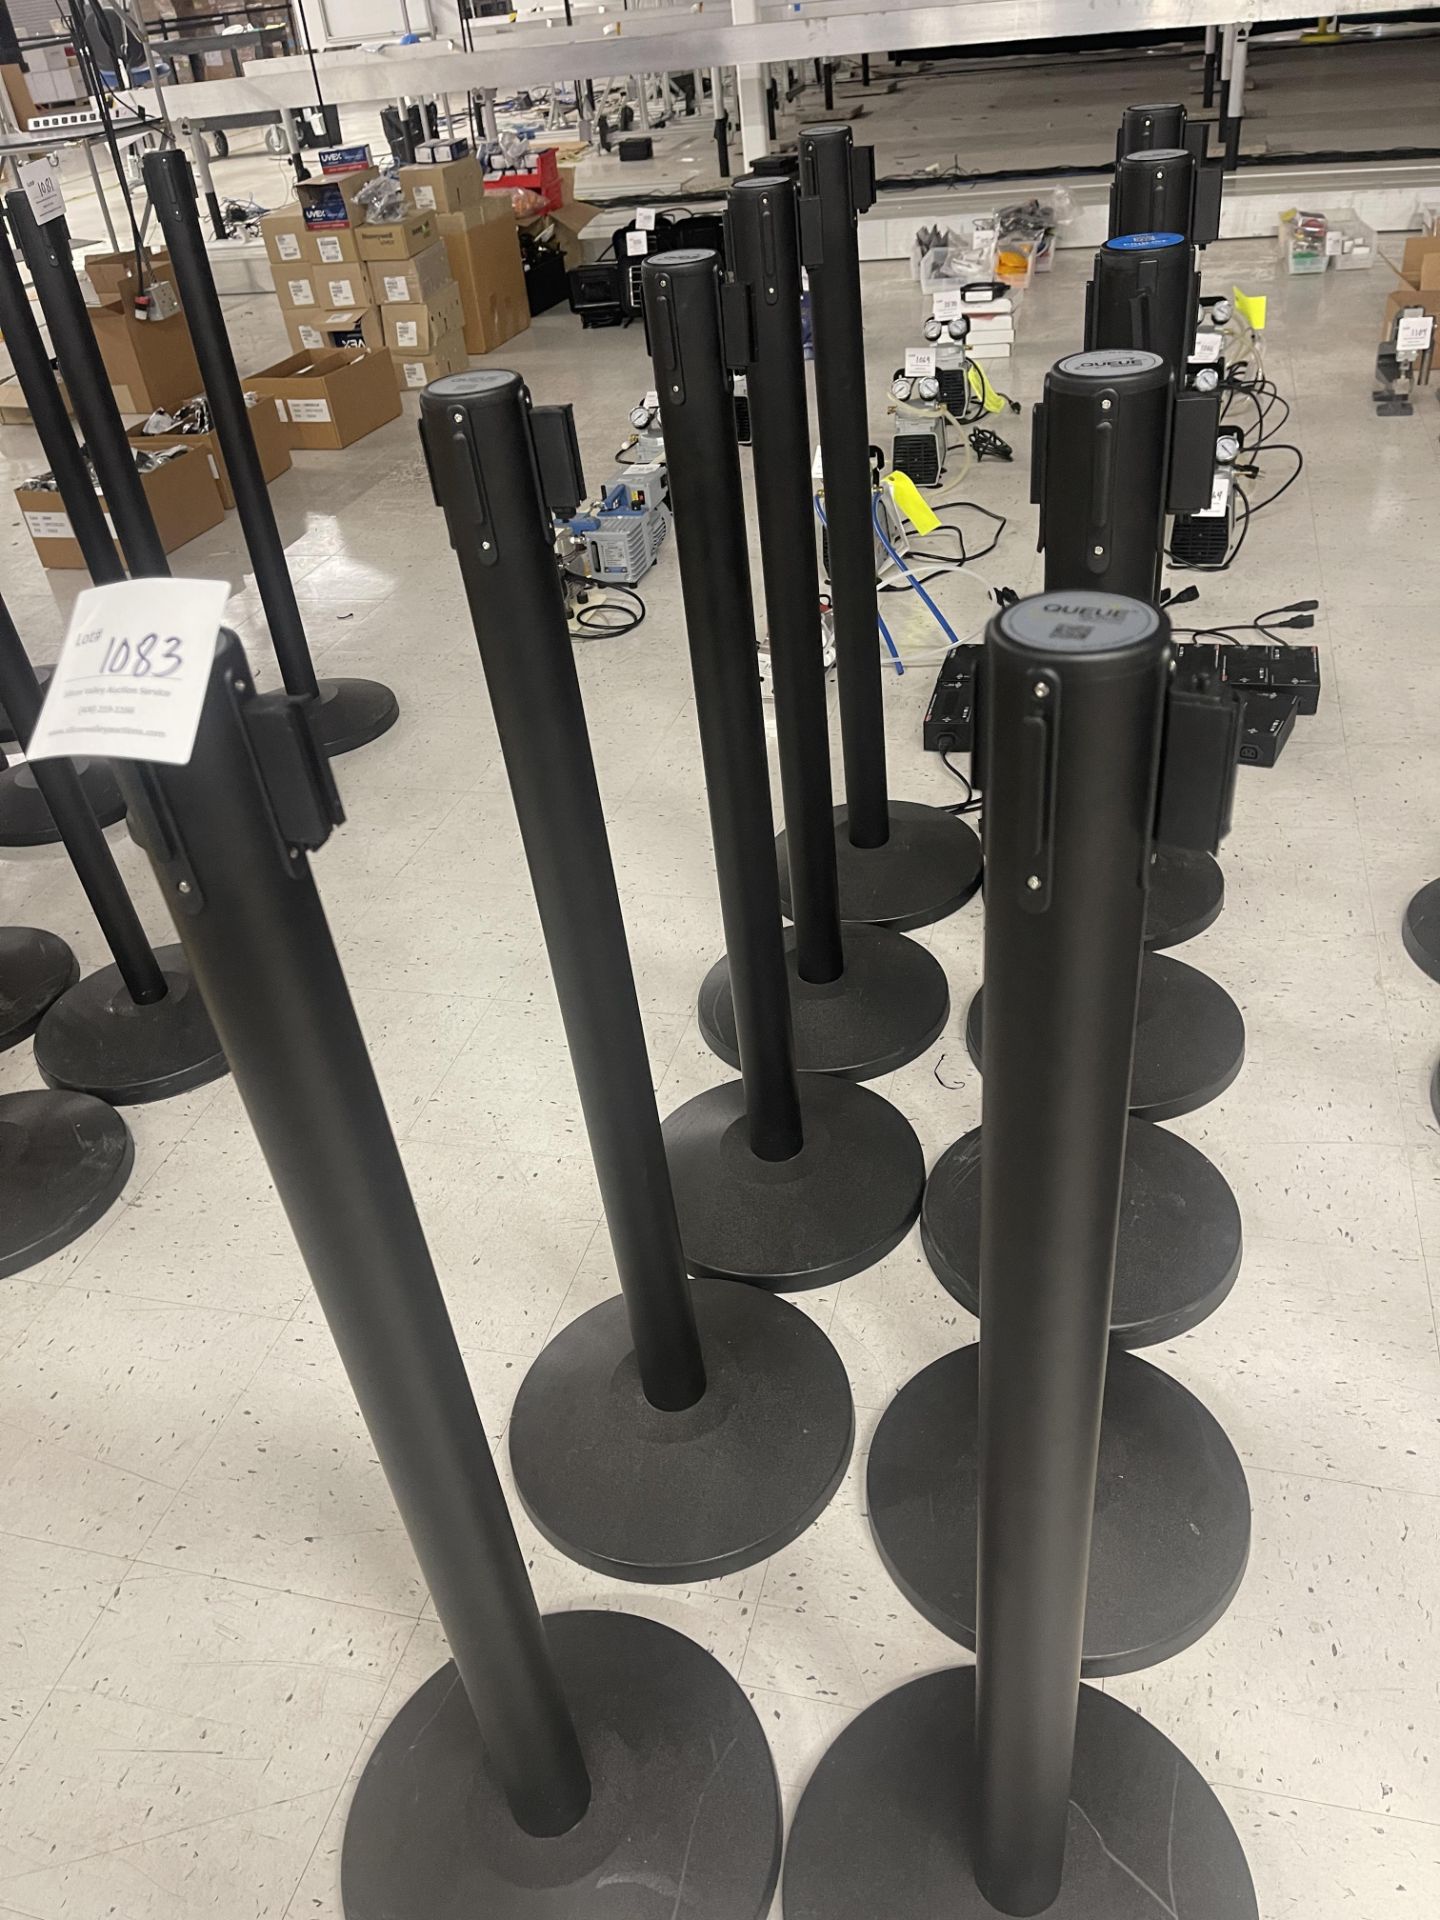 Stanchions - Qty 10 - Black Crowd Control Barriier Posts 40" tall; Belt Length 10 ft